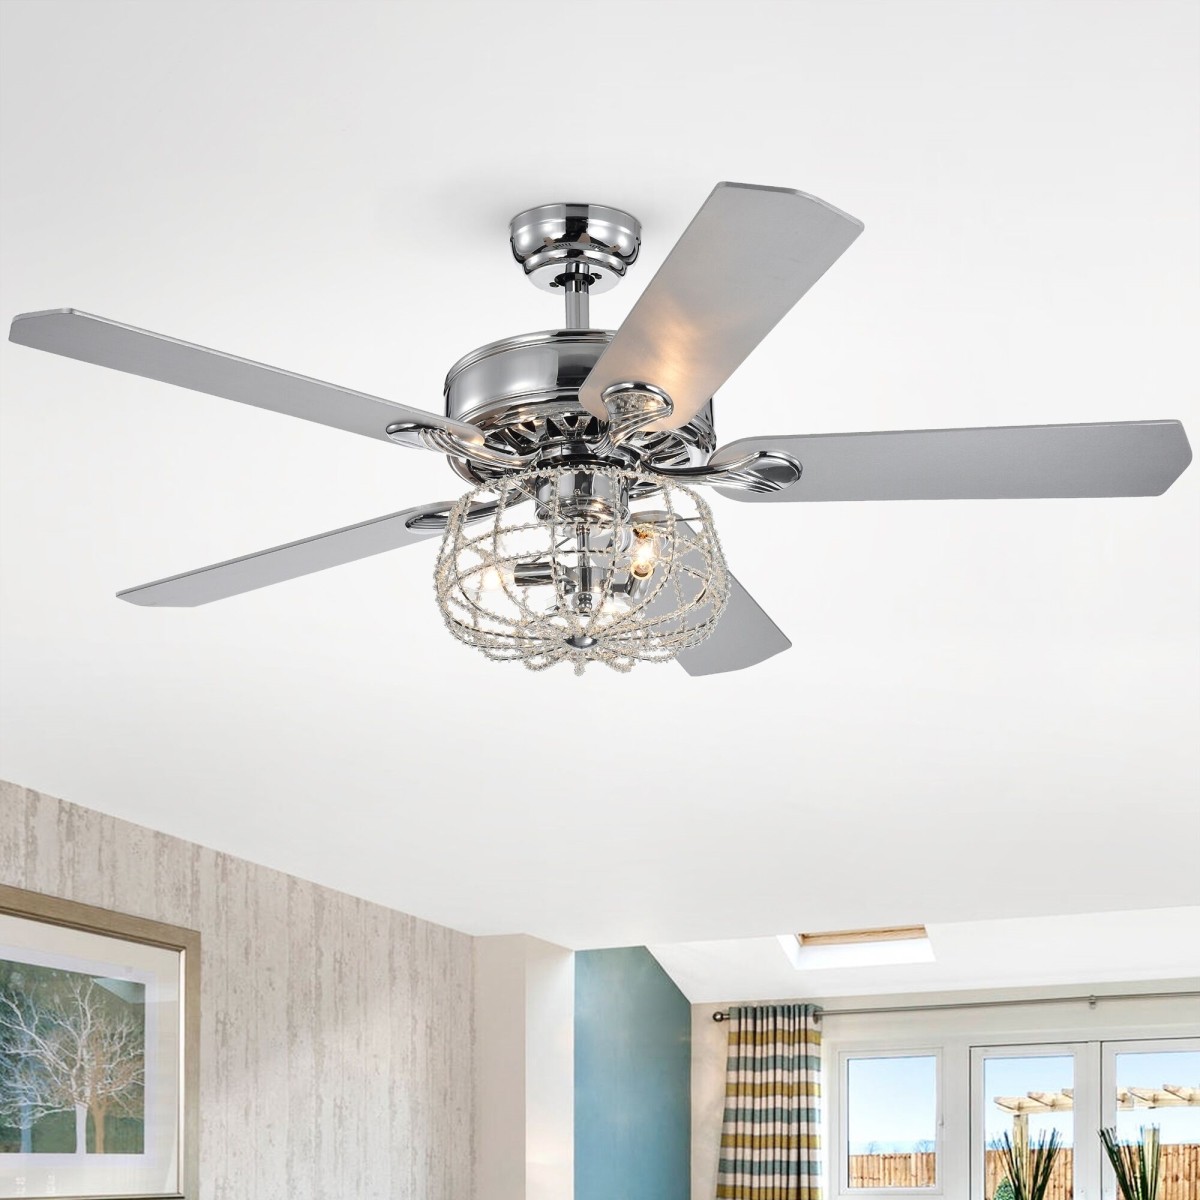 Kishel Chrome 5-Blade Lighted Ceiling Fan with Cage Chandelier (includes Remote and 2 blade color options)